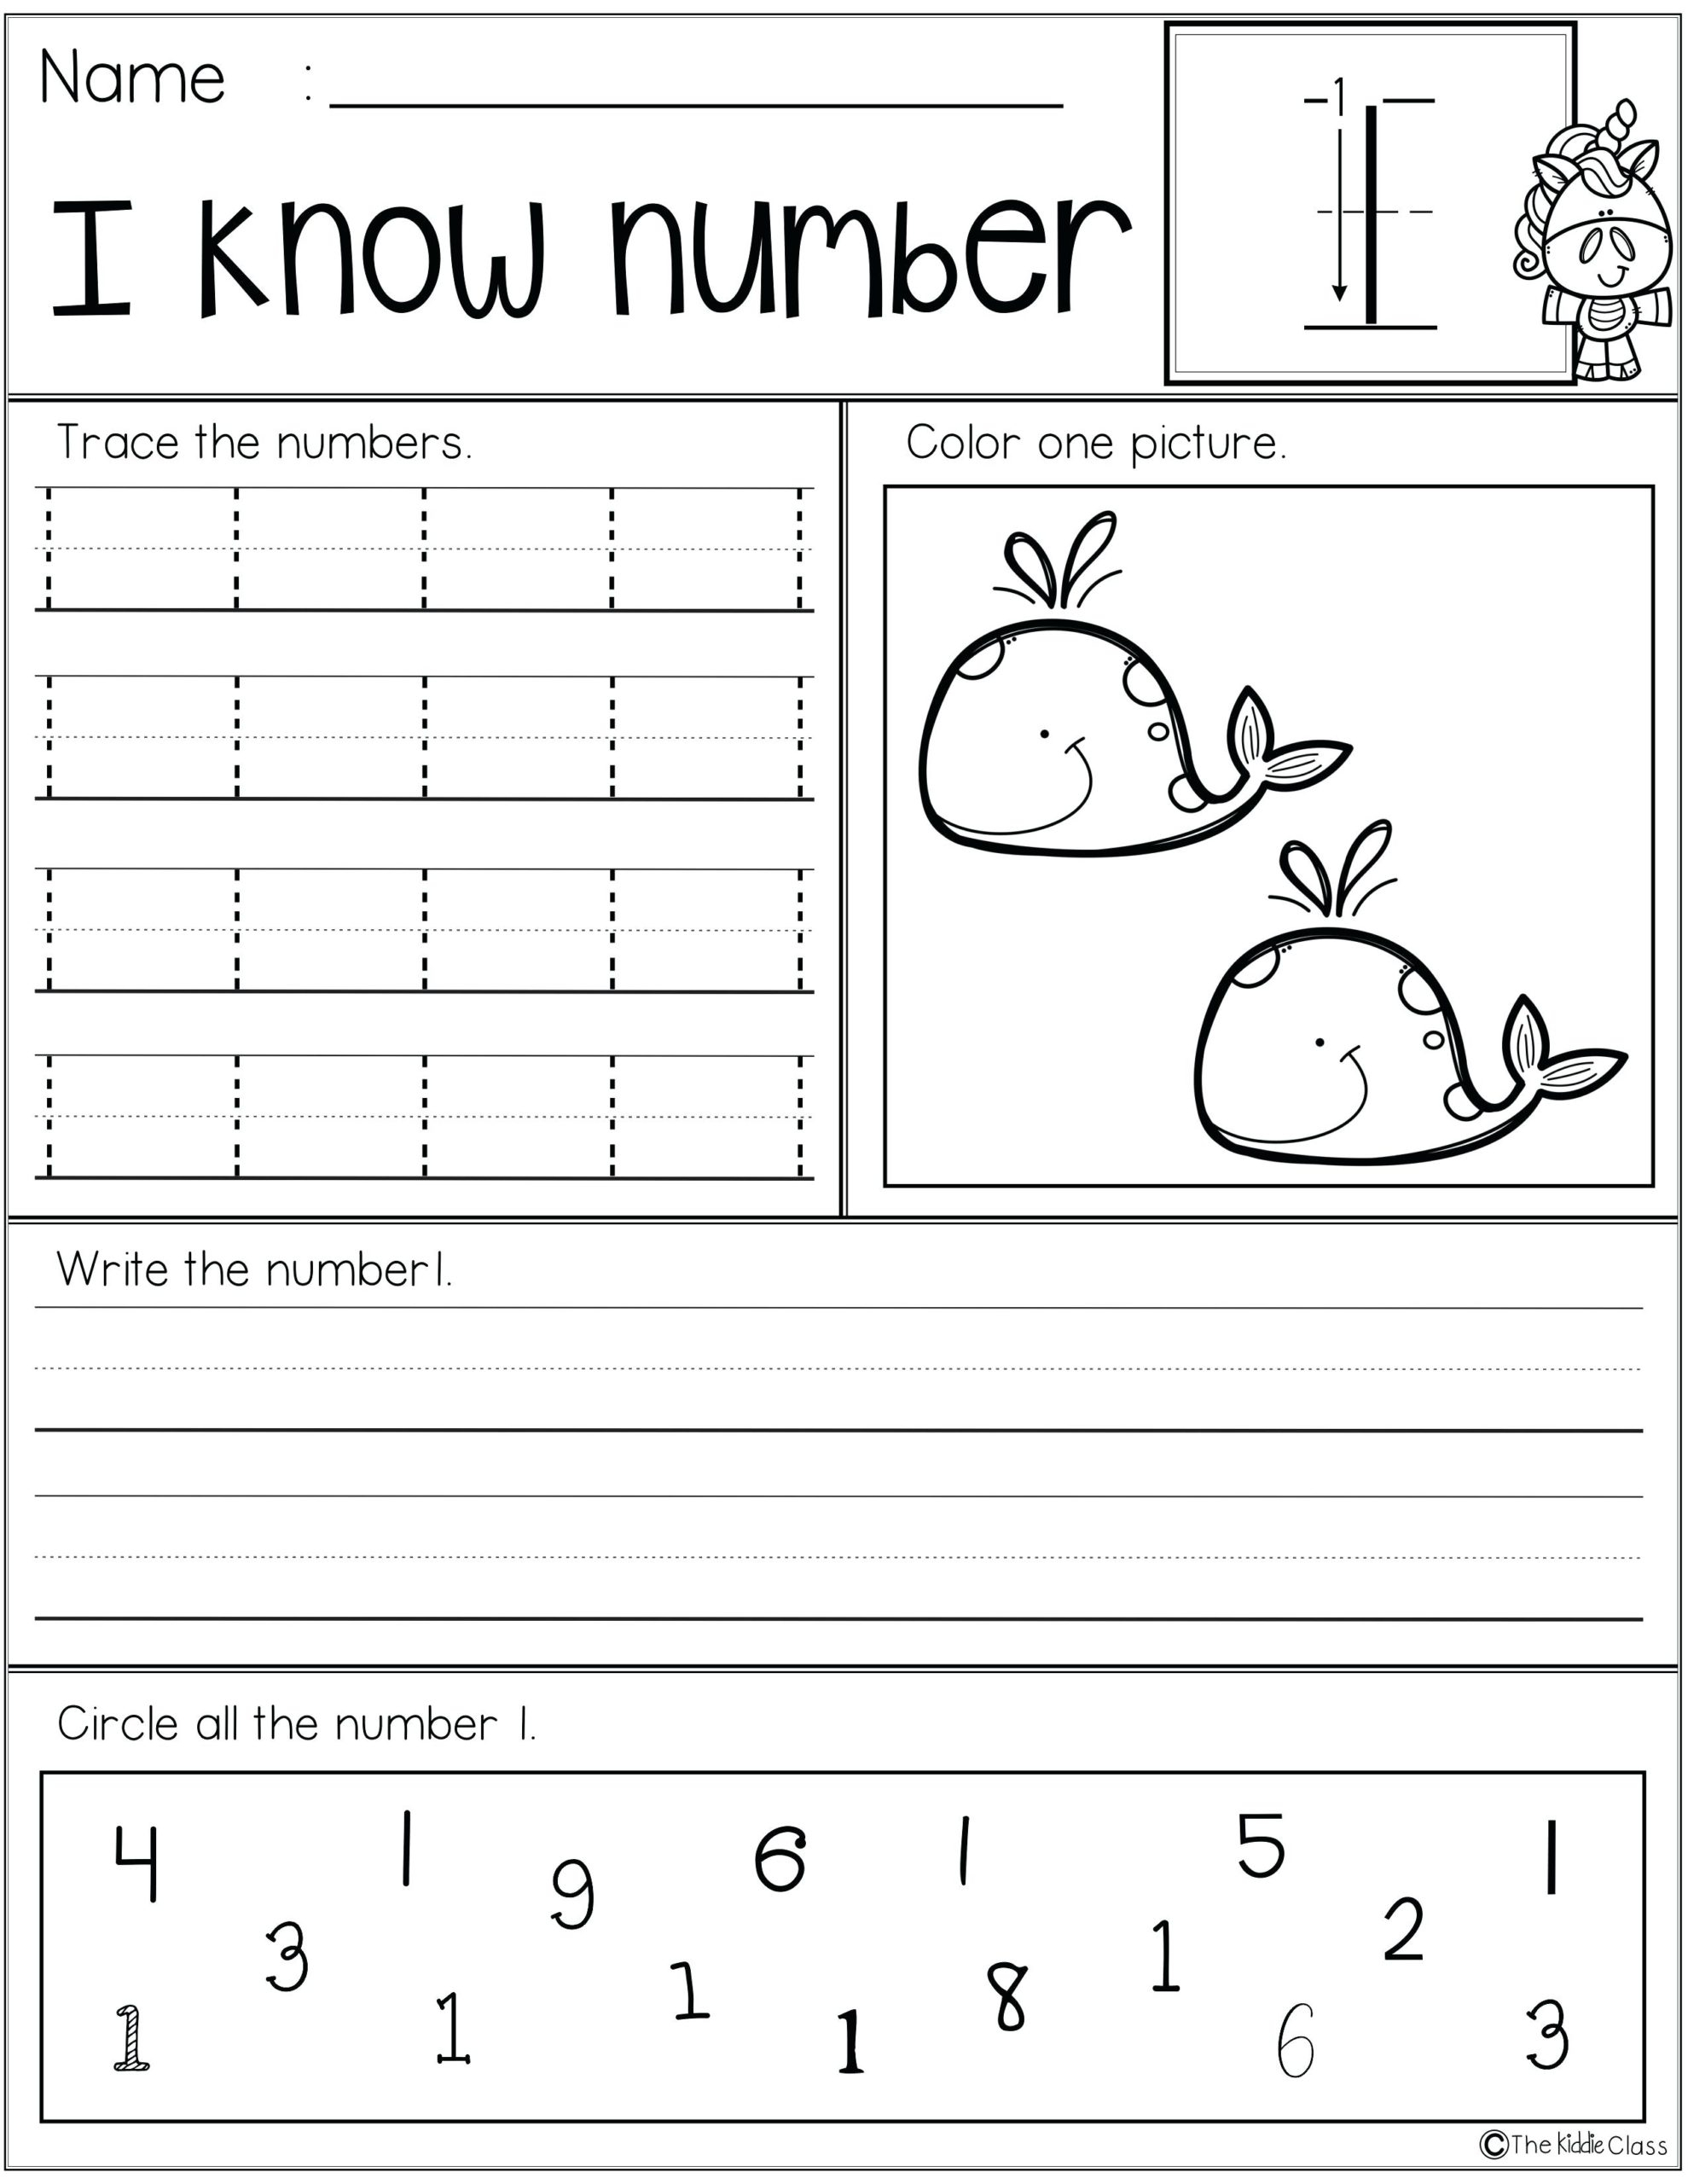 Math Worksheet : Extraordinary Free Name Tracing Worksheets intended for Name Tracing Activities